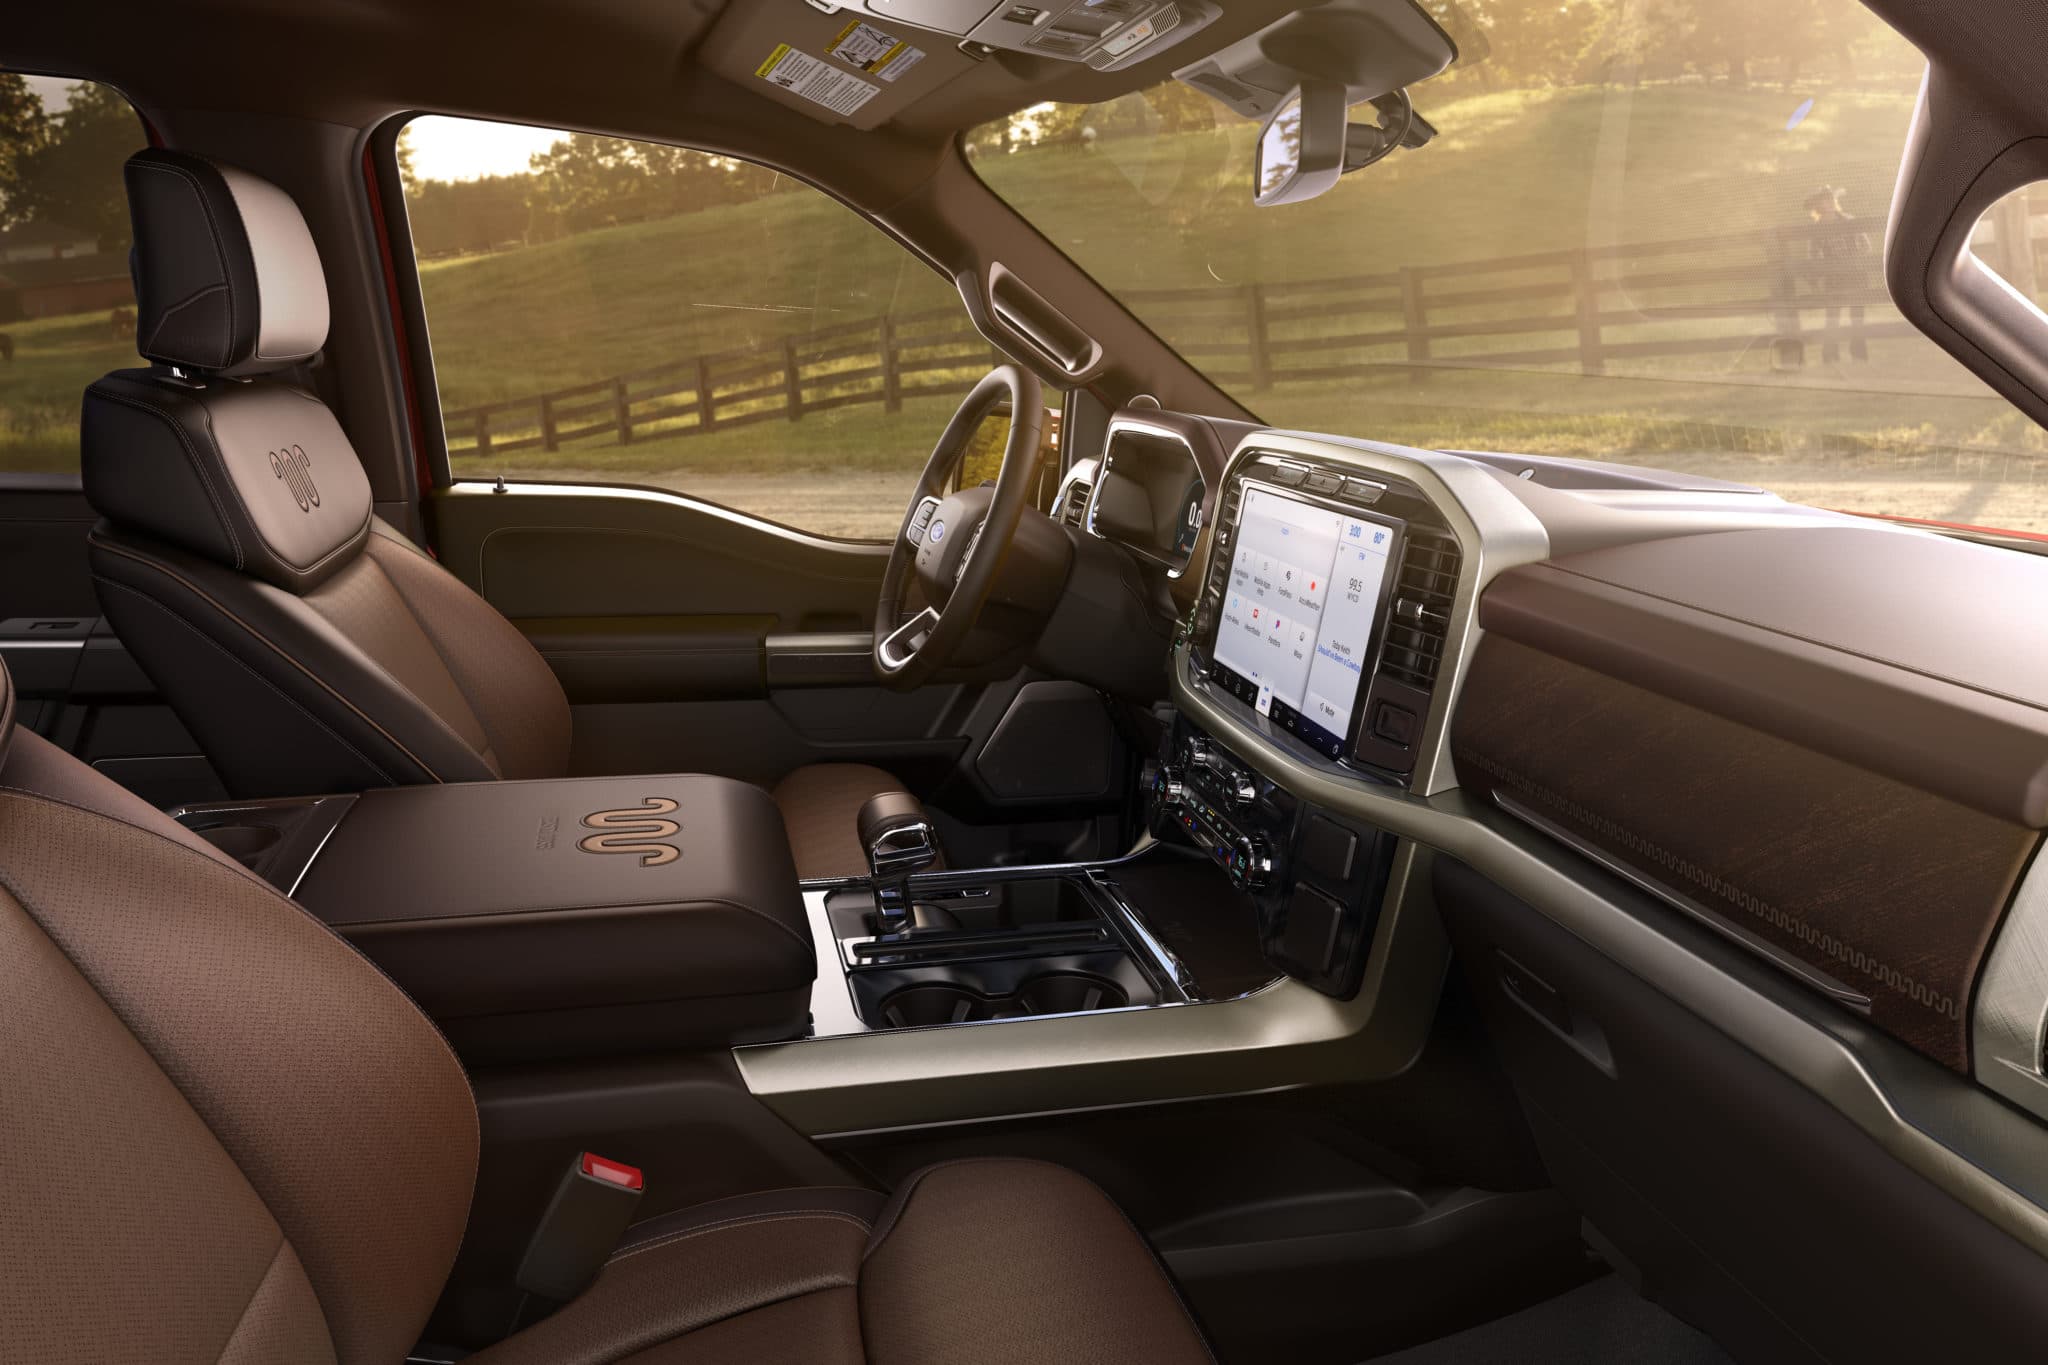 King Ranch Hybrid Shows Off F-150 Capabilities - The BRAKE Report